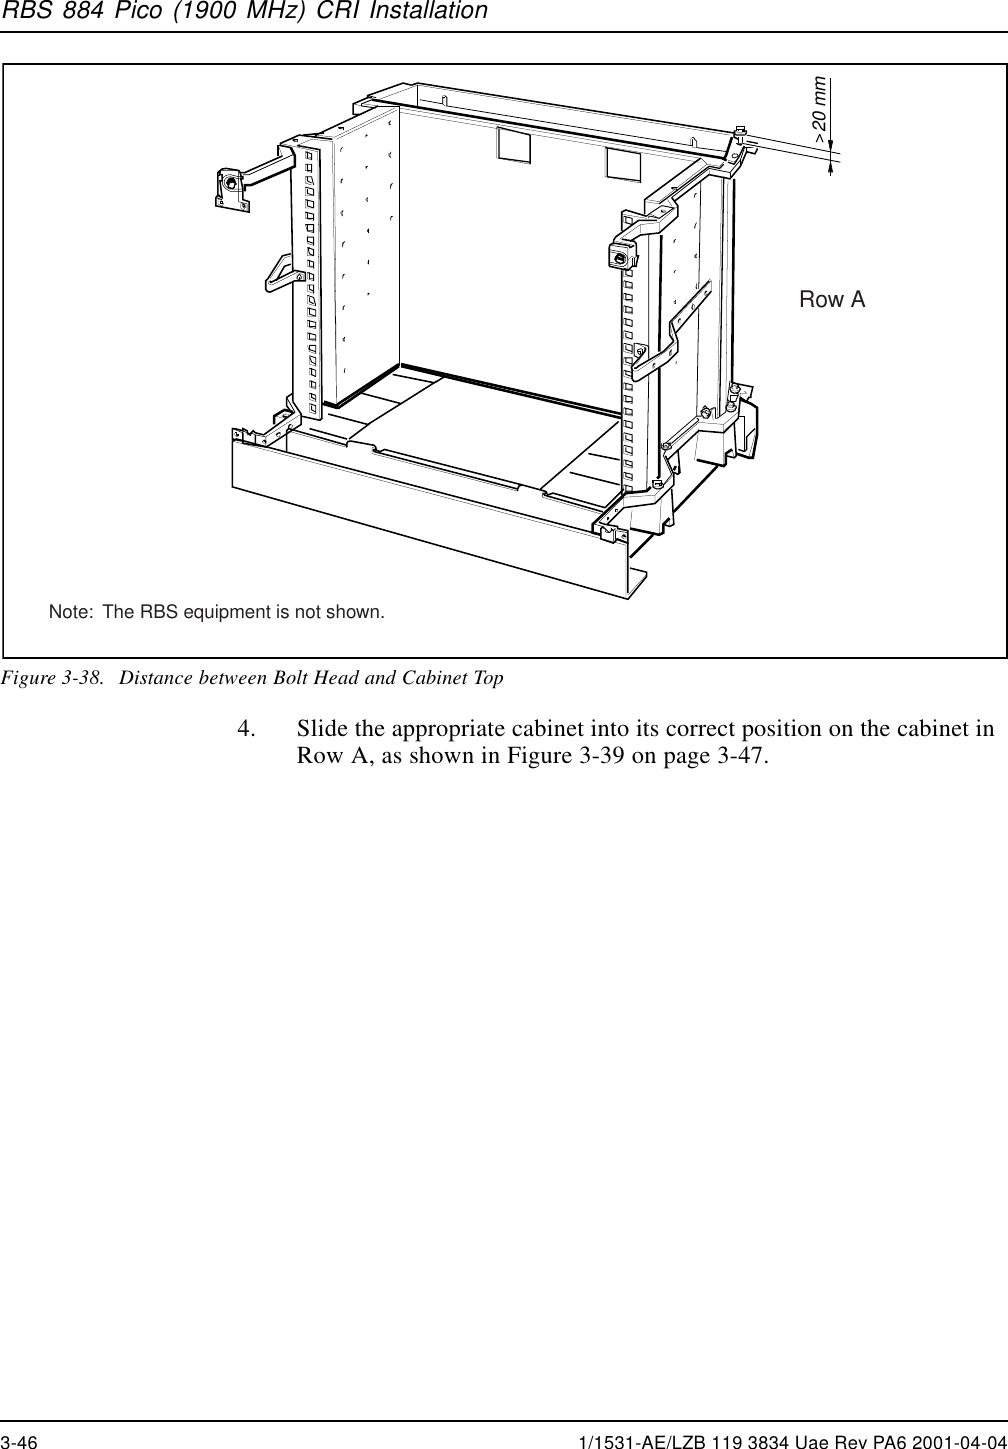 RBS 884 Pico (1900 MHz) CRI Installation20 mm&gt;Row ANote:  The RBS equipment is not shown.Figure 3-38. Distance between Bolt Head and Cabinet Top4. Slide the appropriate cabinet into its correct position on the cabinet inRow A, as shown in Figure 3-39 on page 3-47.3-46 1/1531-AE/LZB 119 3834 Uae Rev PA6 2001-04-04